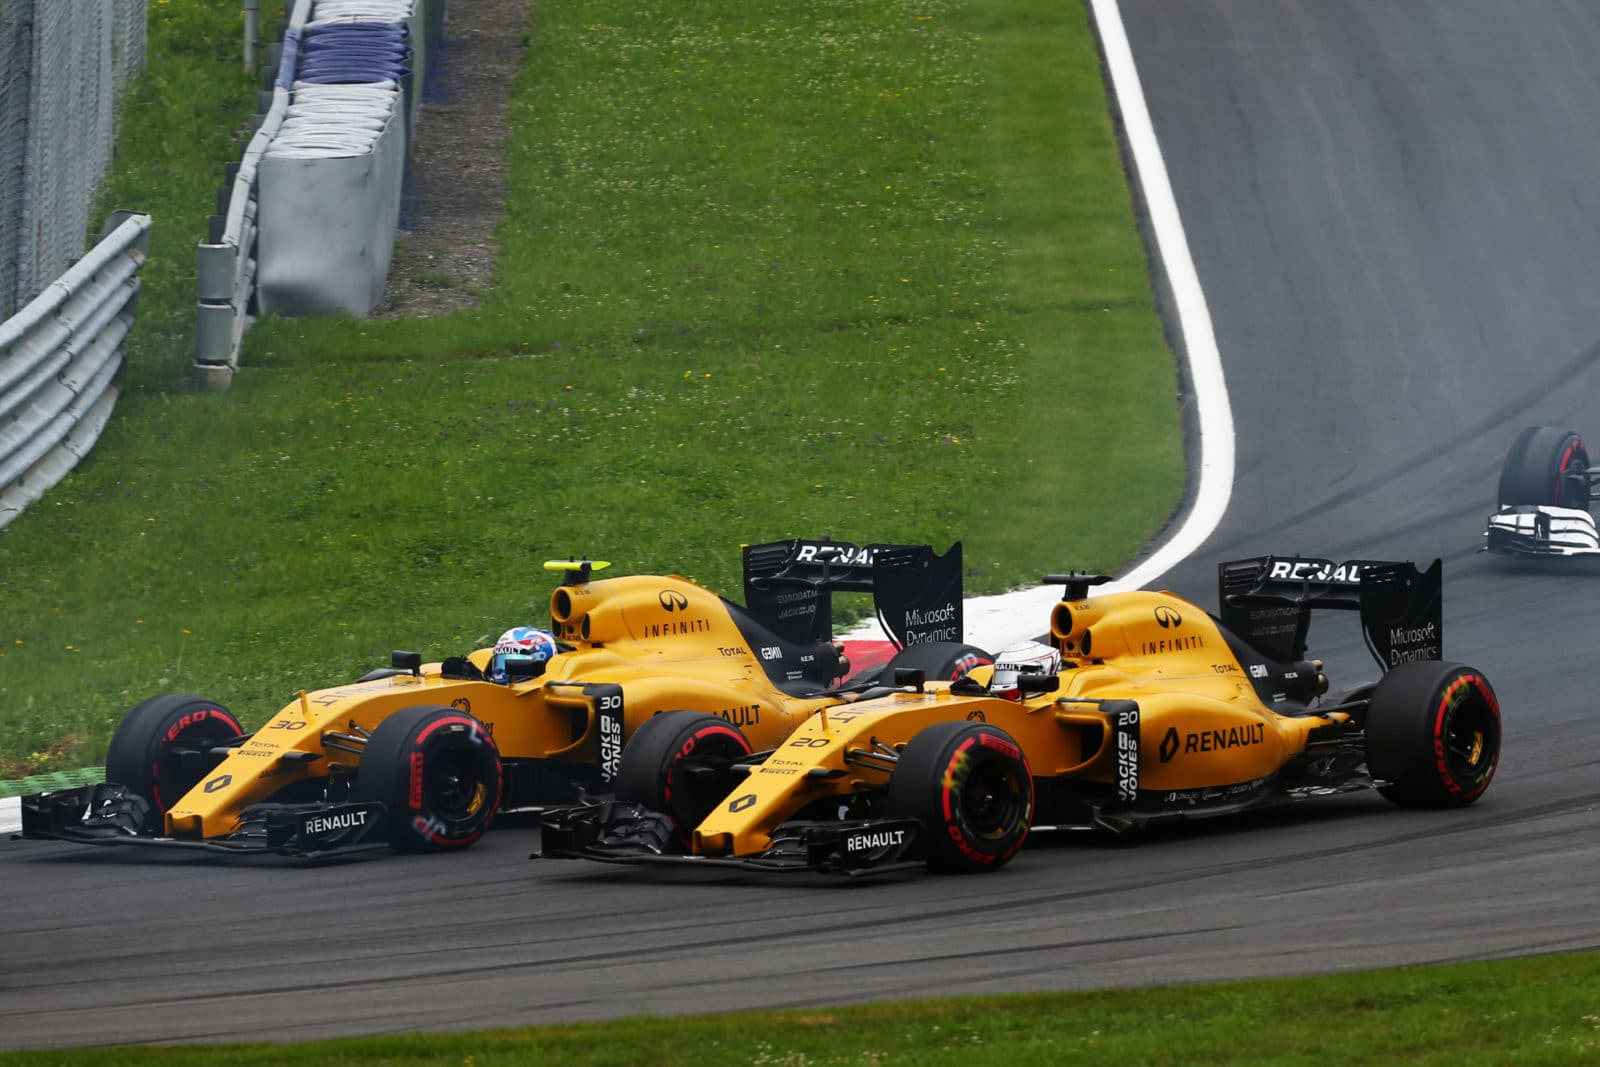 Jolyon Palmer (GBR) Renault Sport F1 Team RS16 and team mate Kevin Magnussen (DEN) Renault Sport F1 Team RS16 at the start of the race. Austrian Grand Prix, Sunday 3rd July 2016. Spielberg, Austria.